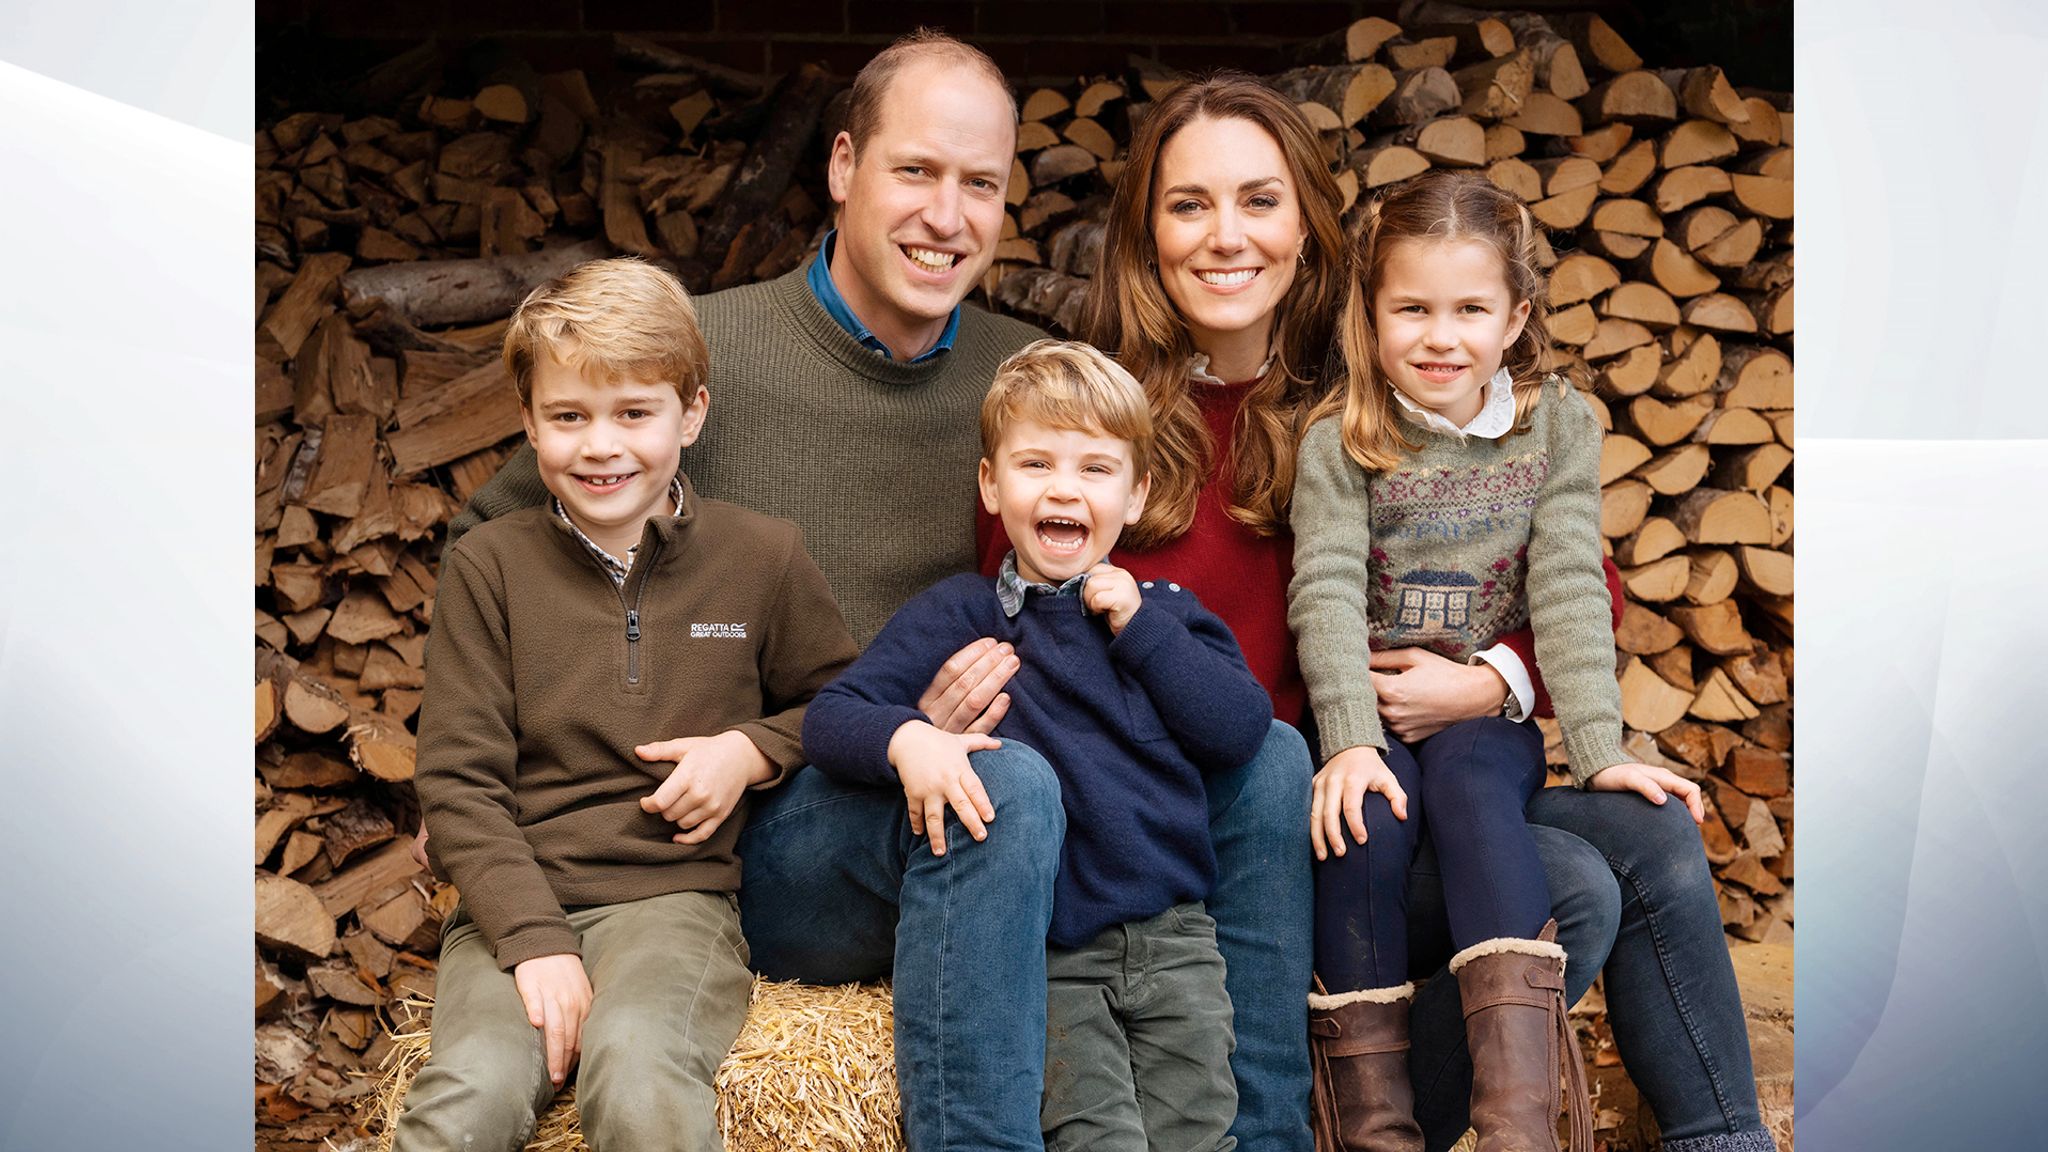 Cambridges' Christmas card Prince William and Kate share smiling